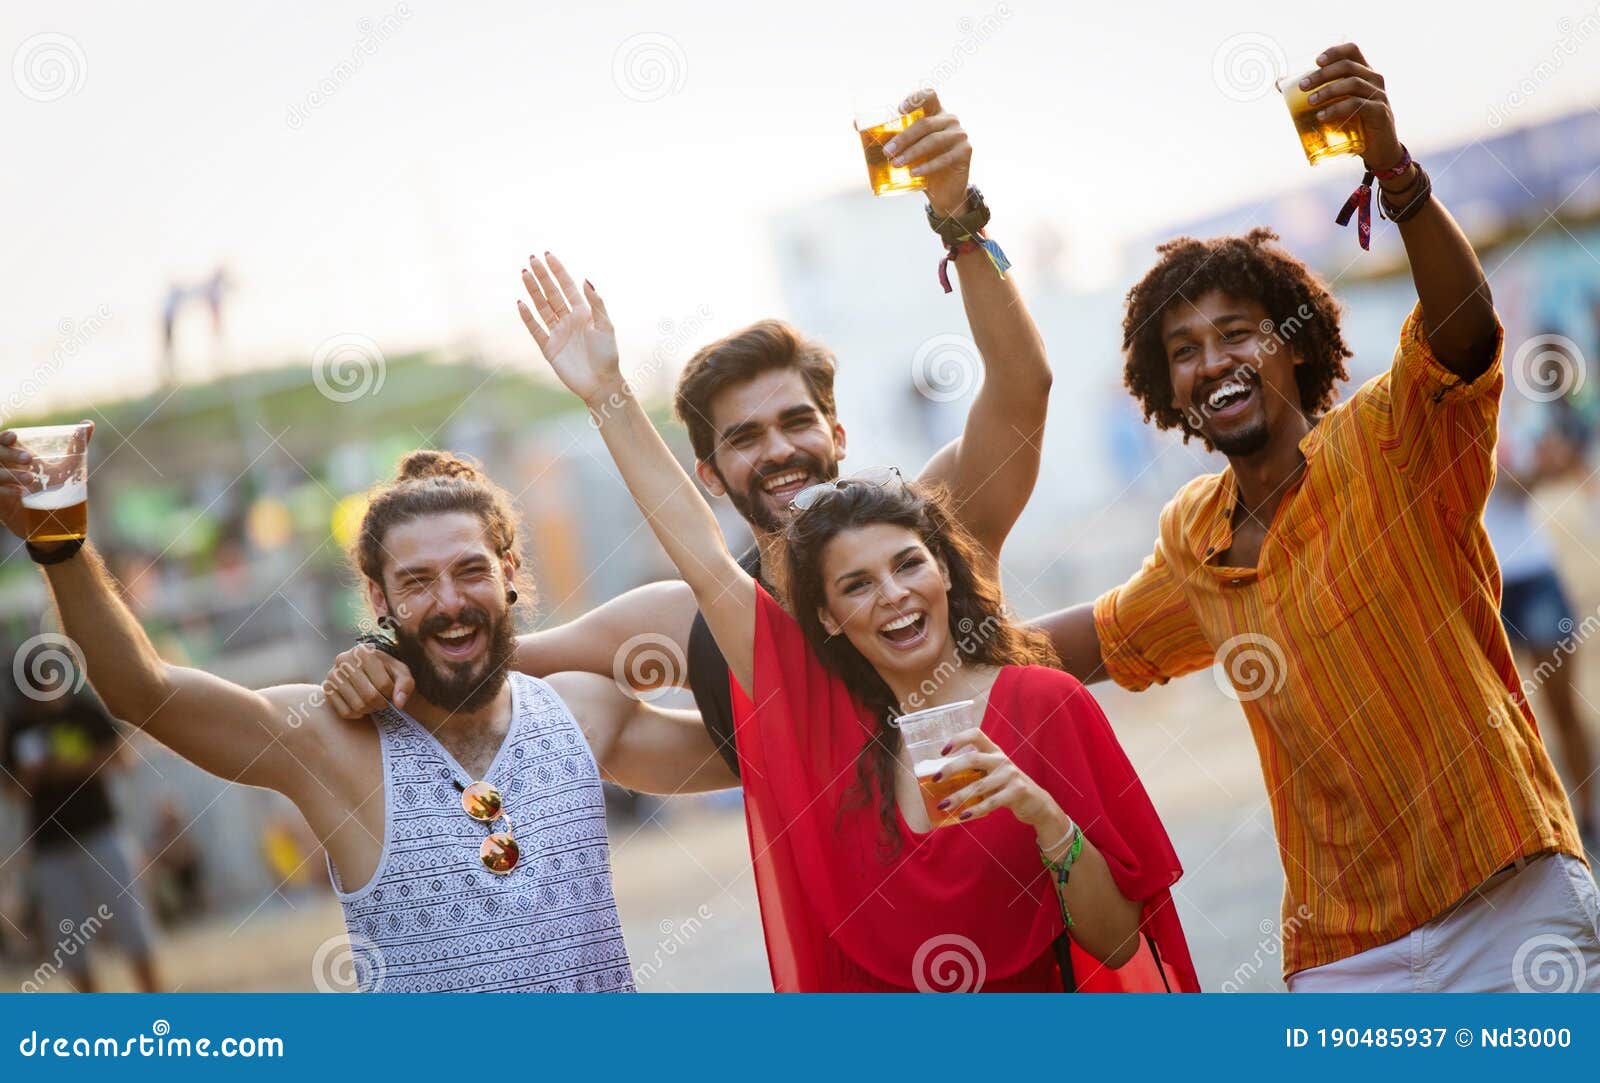 Happy Young People Attending Festivals at Summer Having Fun Stock Image ...